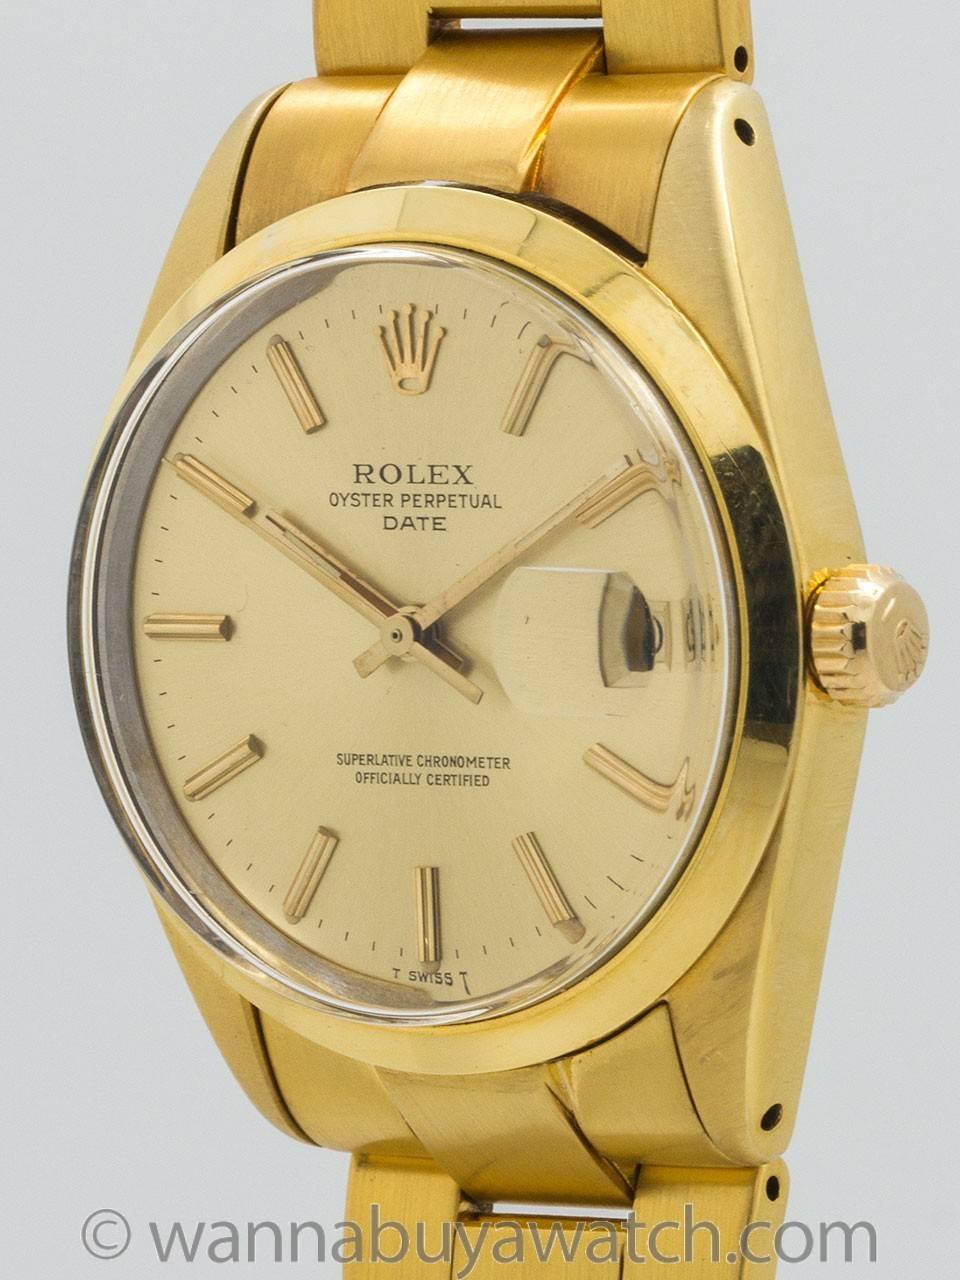 Rolex Oyster Perpetual Date ref #1500 14K yellow gold shell circa 1979.  Gorgeous on a man or woman, this piece would make a lovely commemorative gift for 1979 birth year or wedding anniversary. Featuring 34mm diameter case with smooth bezel,